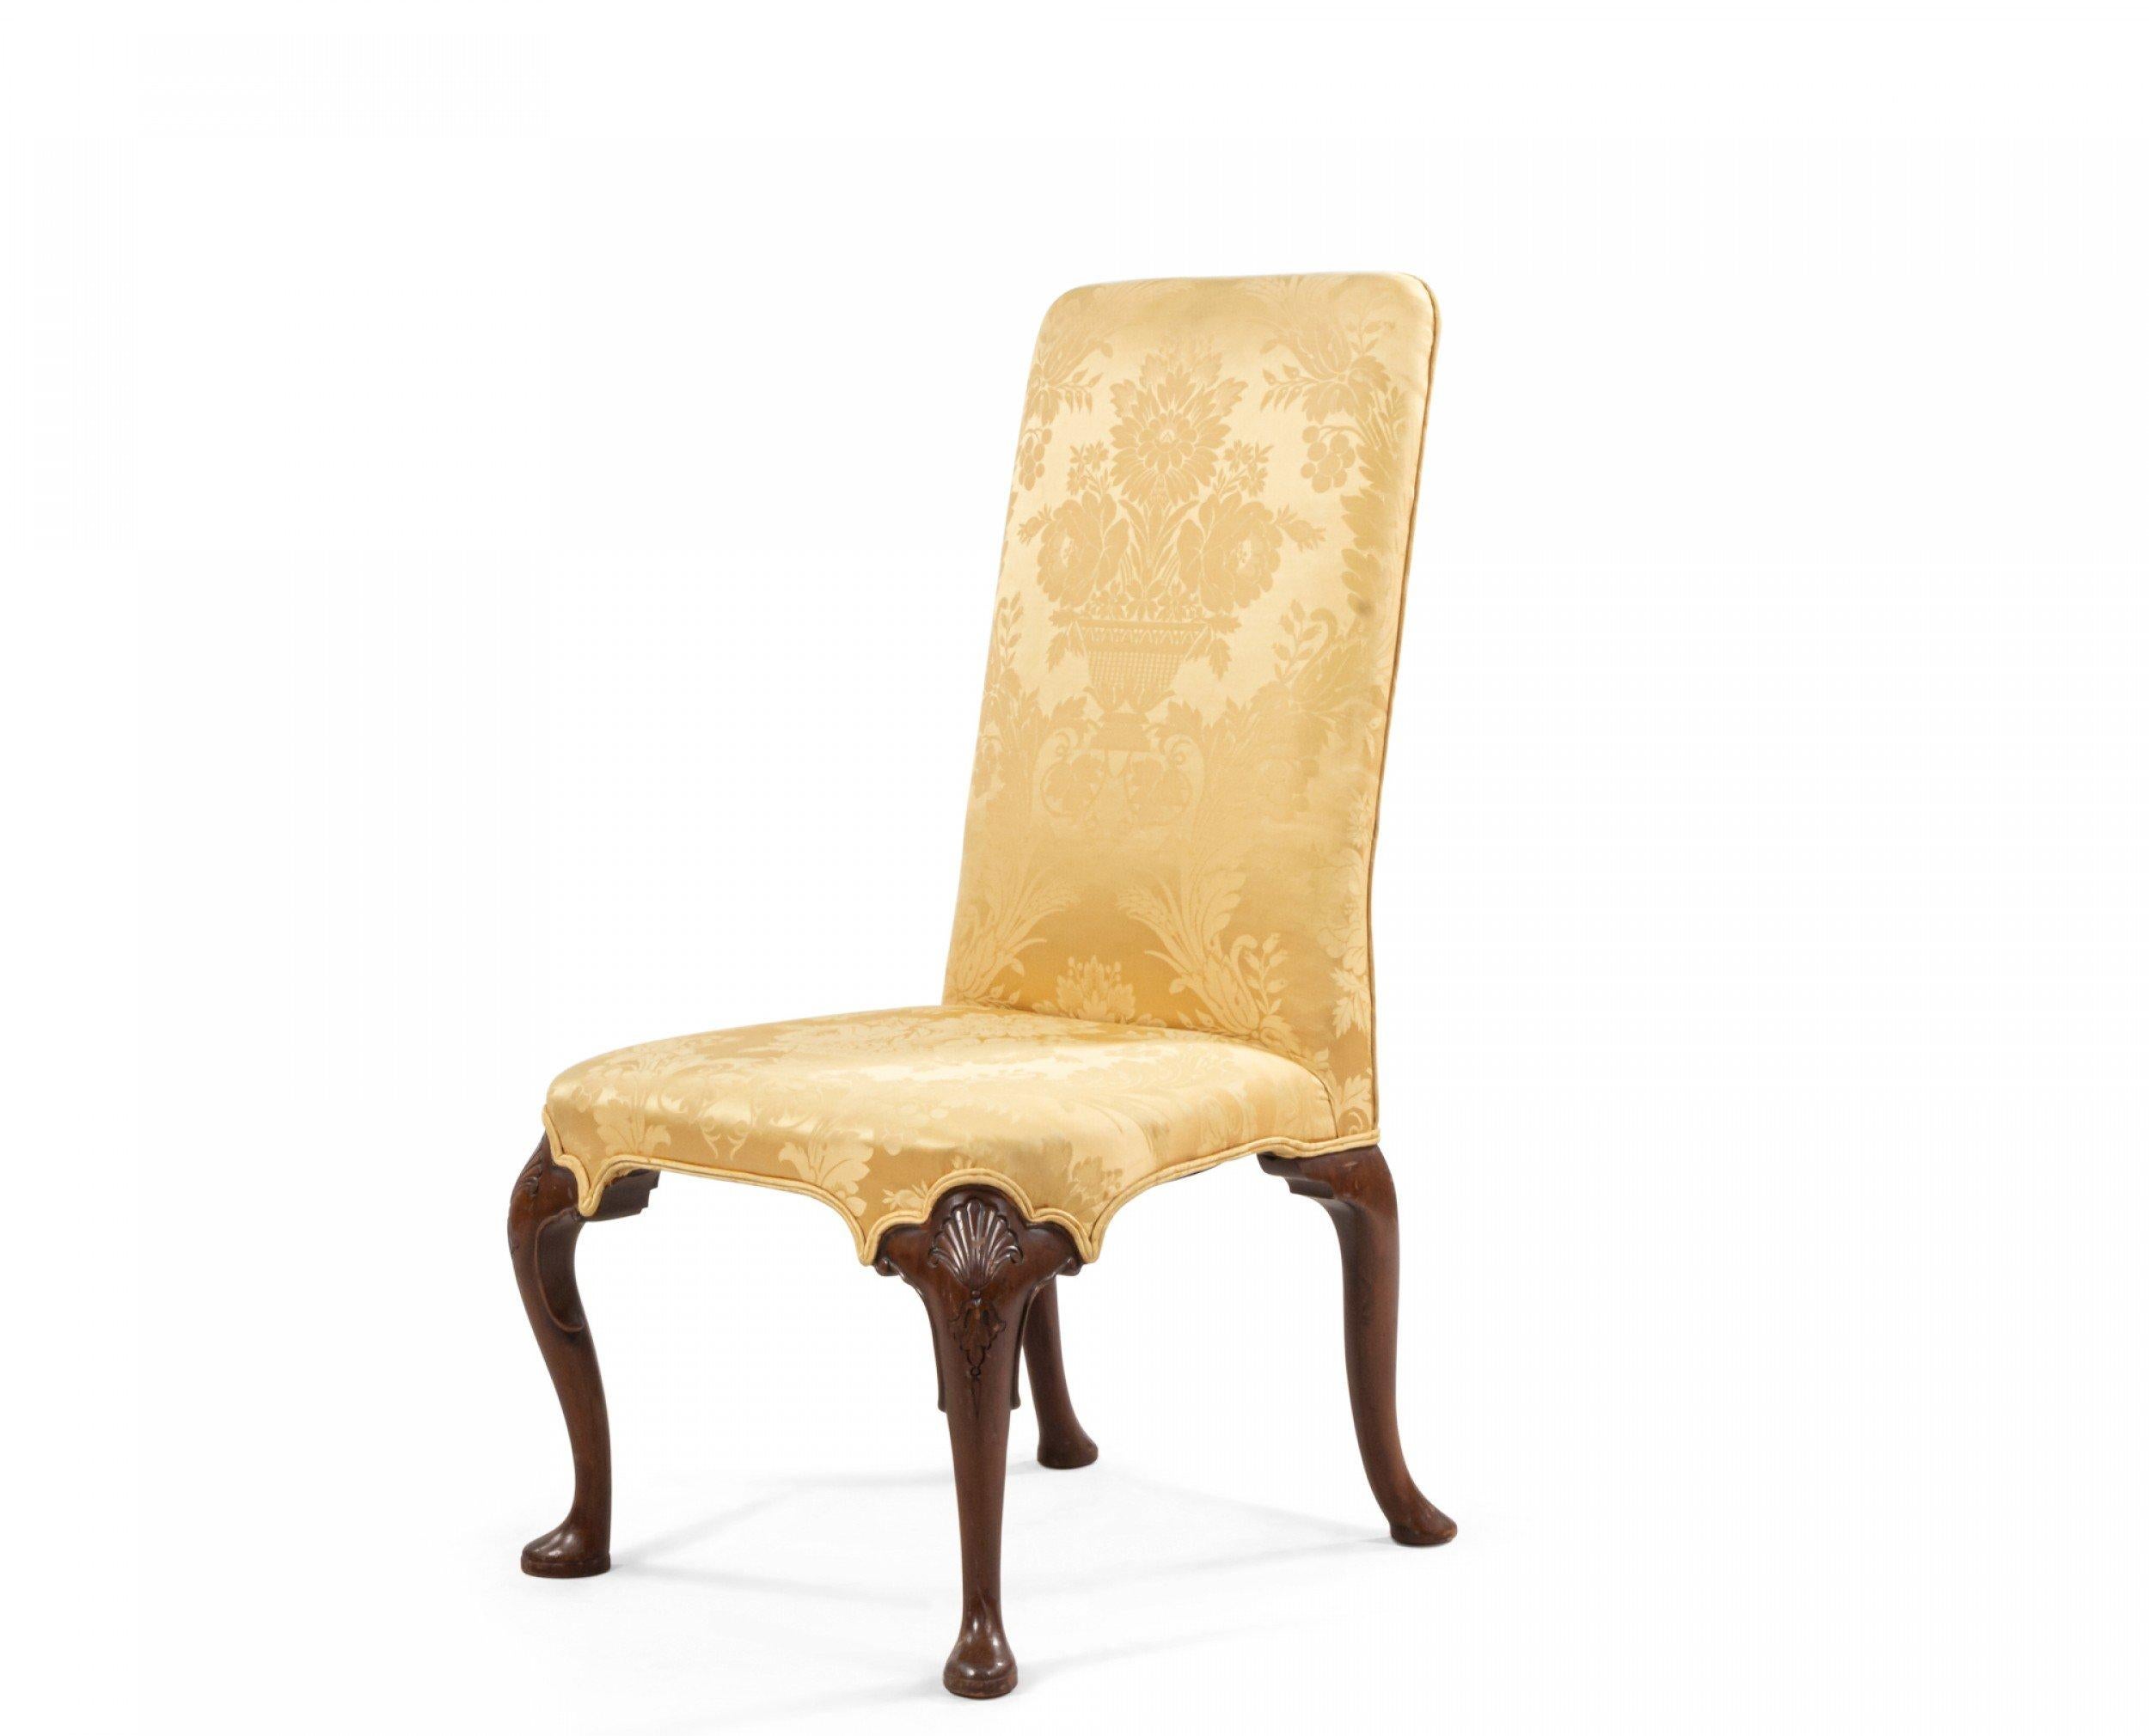 Pair of 20th century English Queen Anne style yellow damask upholstered side chairs with mahogany cabriole legs with carved shell design.